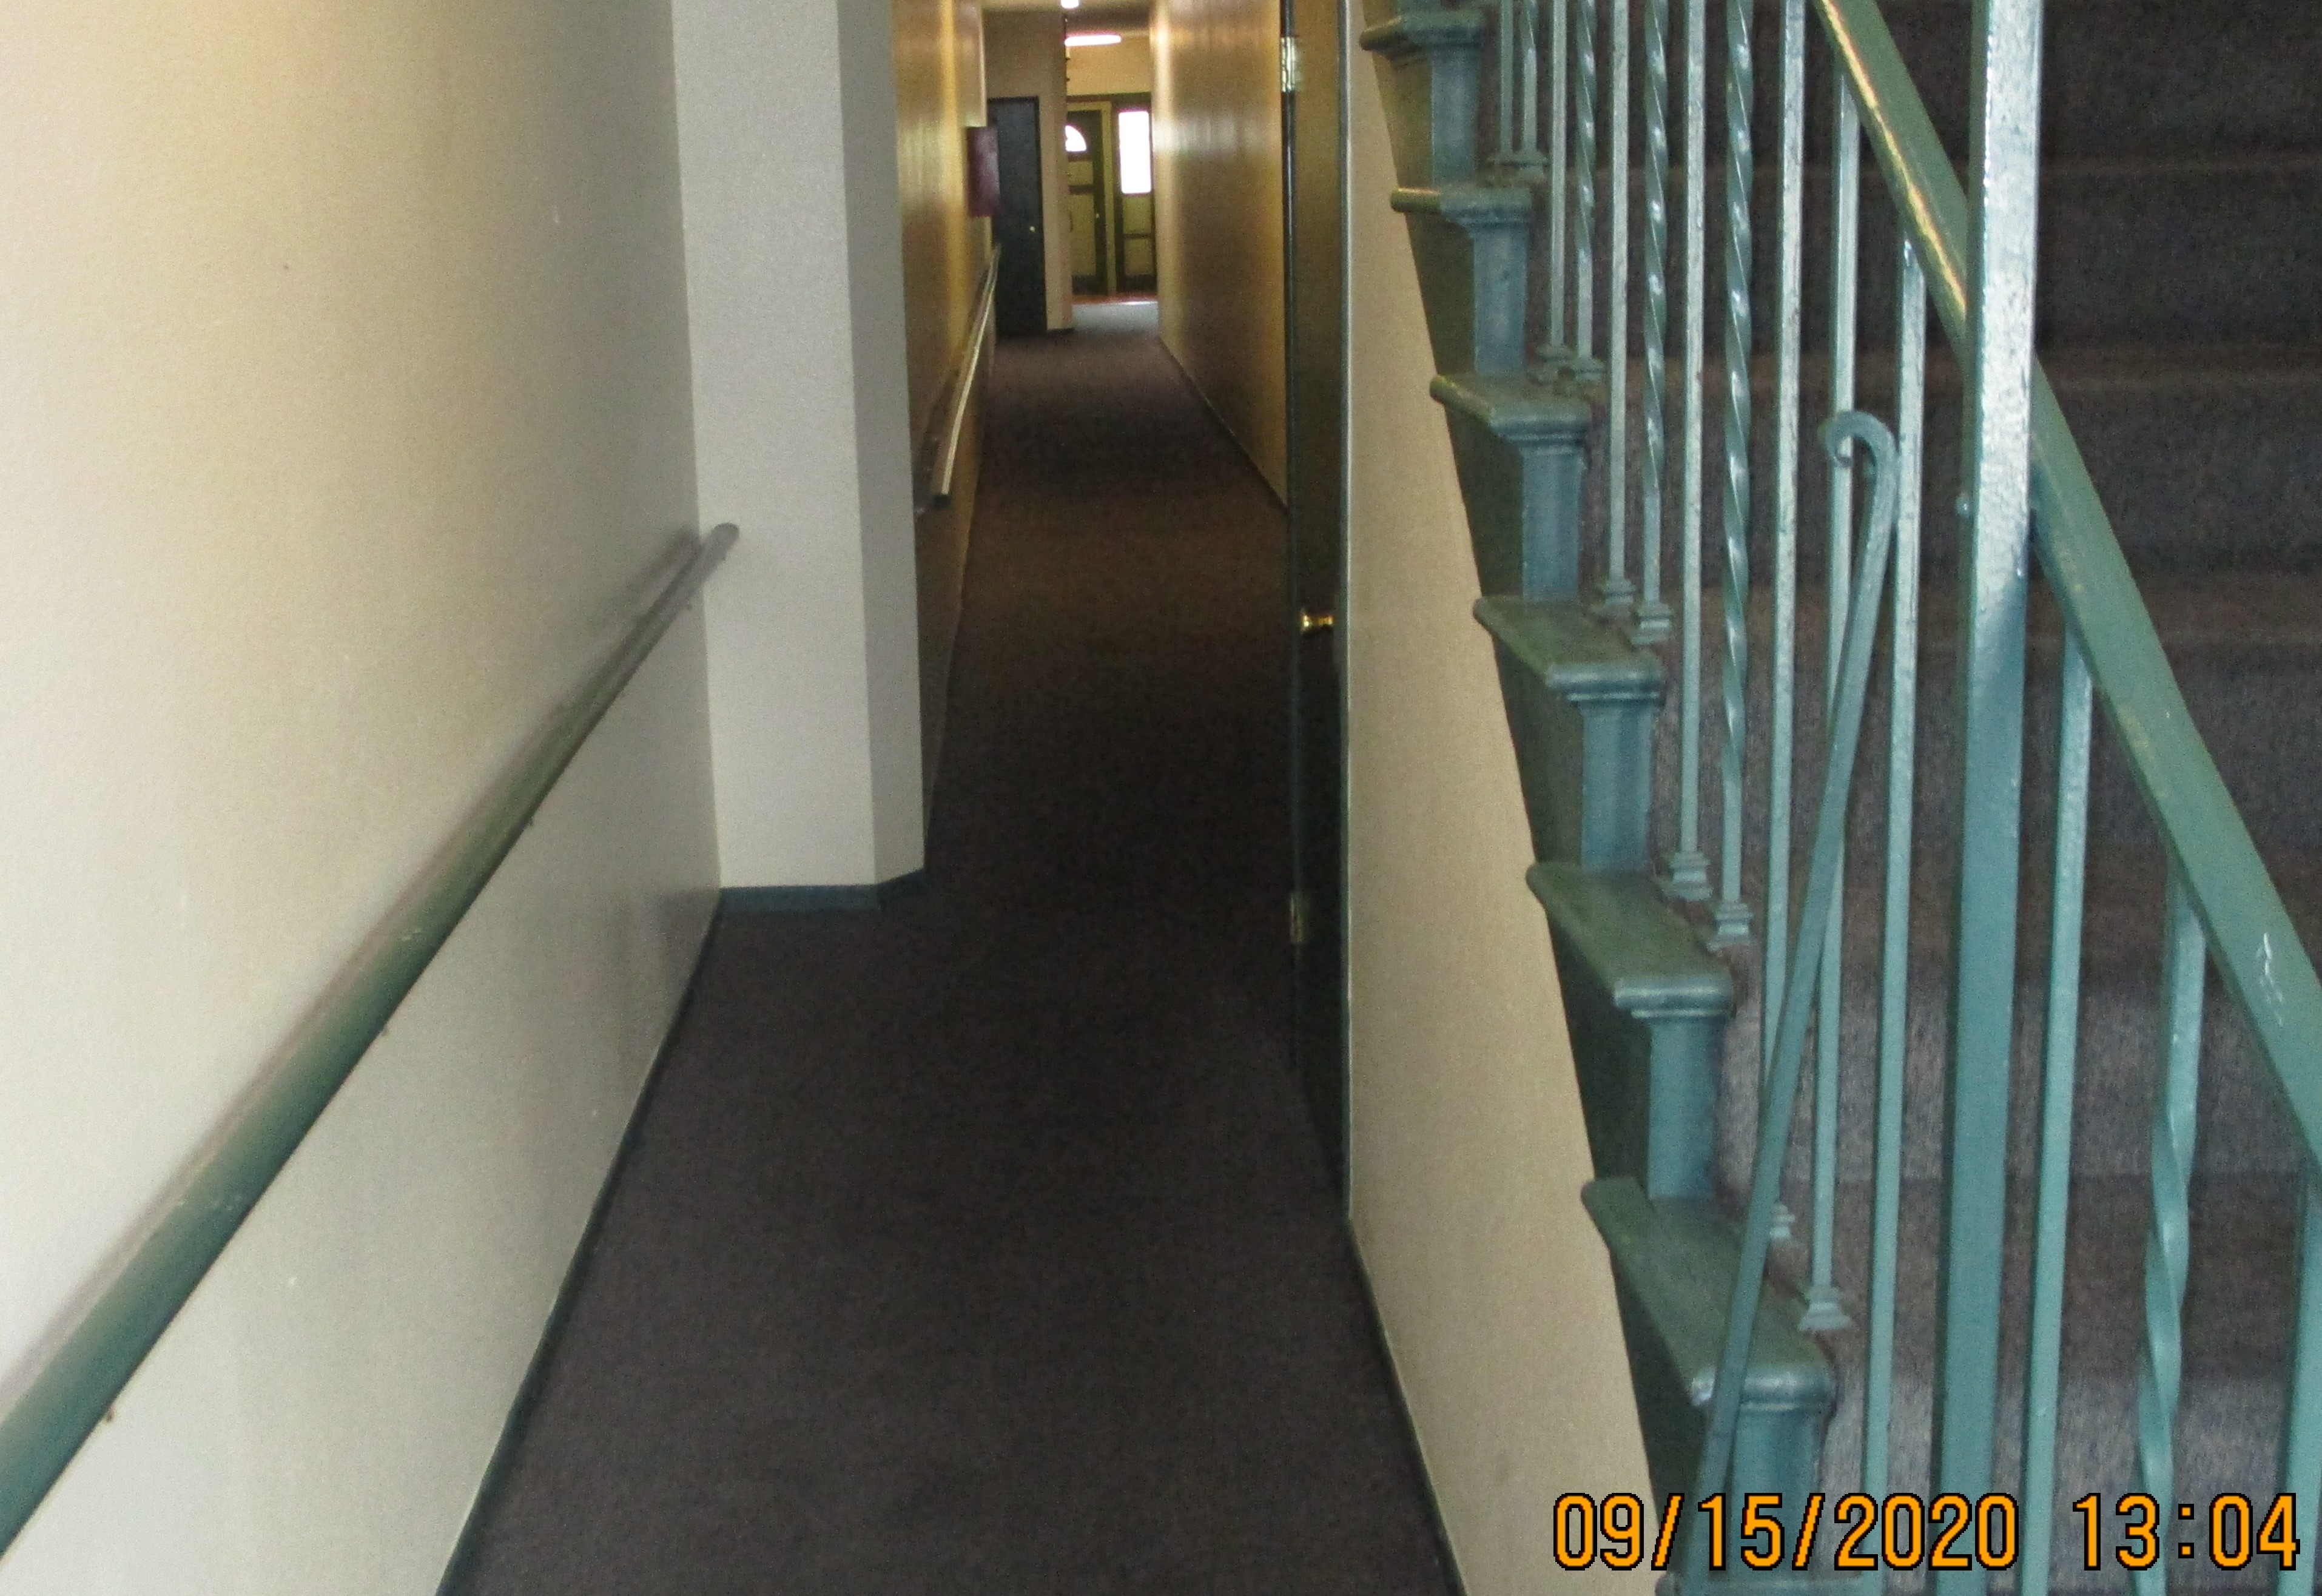 Image of an interior hallway with stairs leading to an upper level on the right hand side.